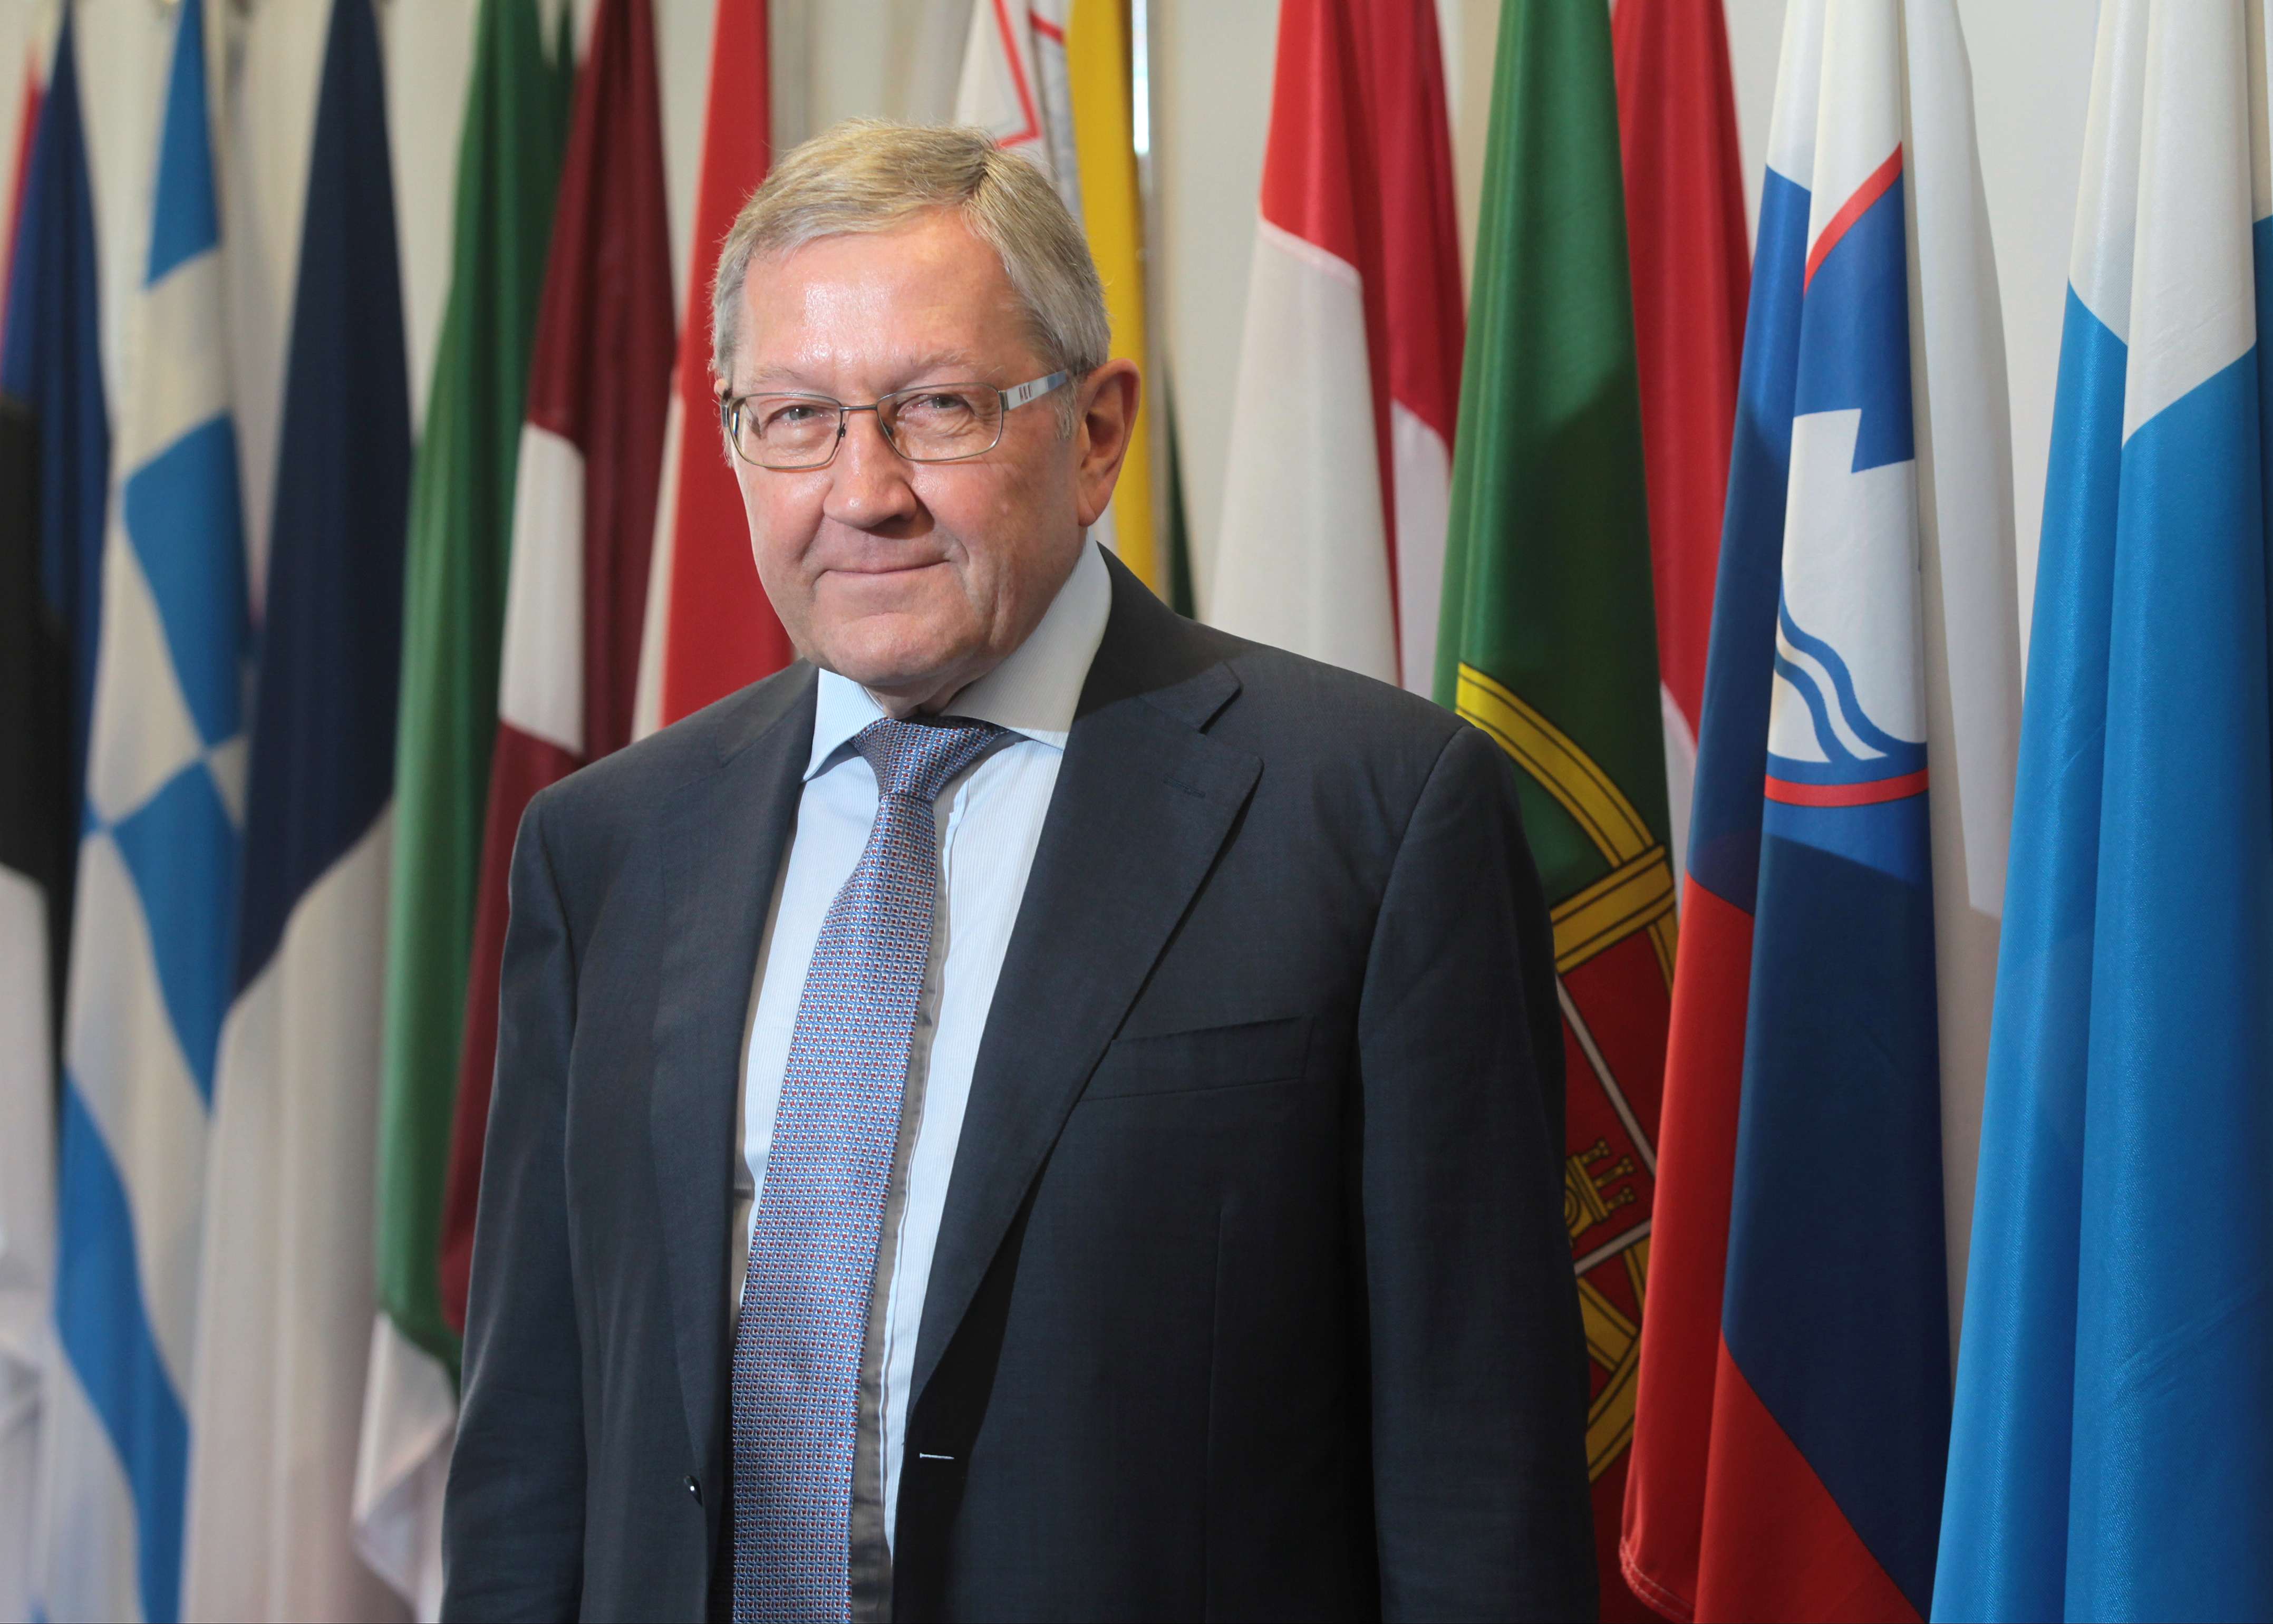 “Europe’s sovereign debt crisis was a stark reminder that modern market economies can still be shaken by such highly disruptive events”- Klaus Regling, managing director of the European Stability Mechanism. Photo: SCMP (ESM) in Central. 17NOV15